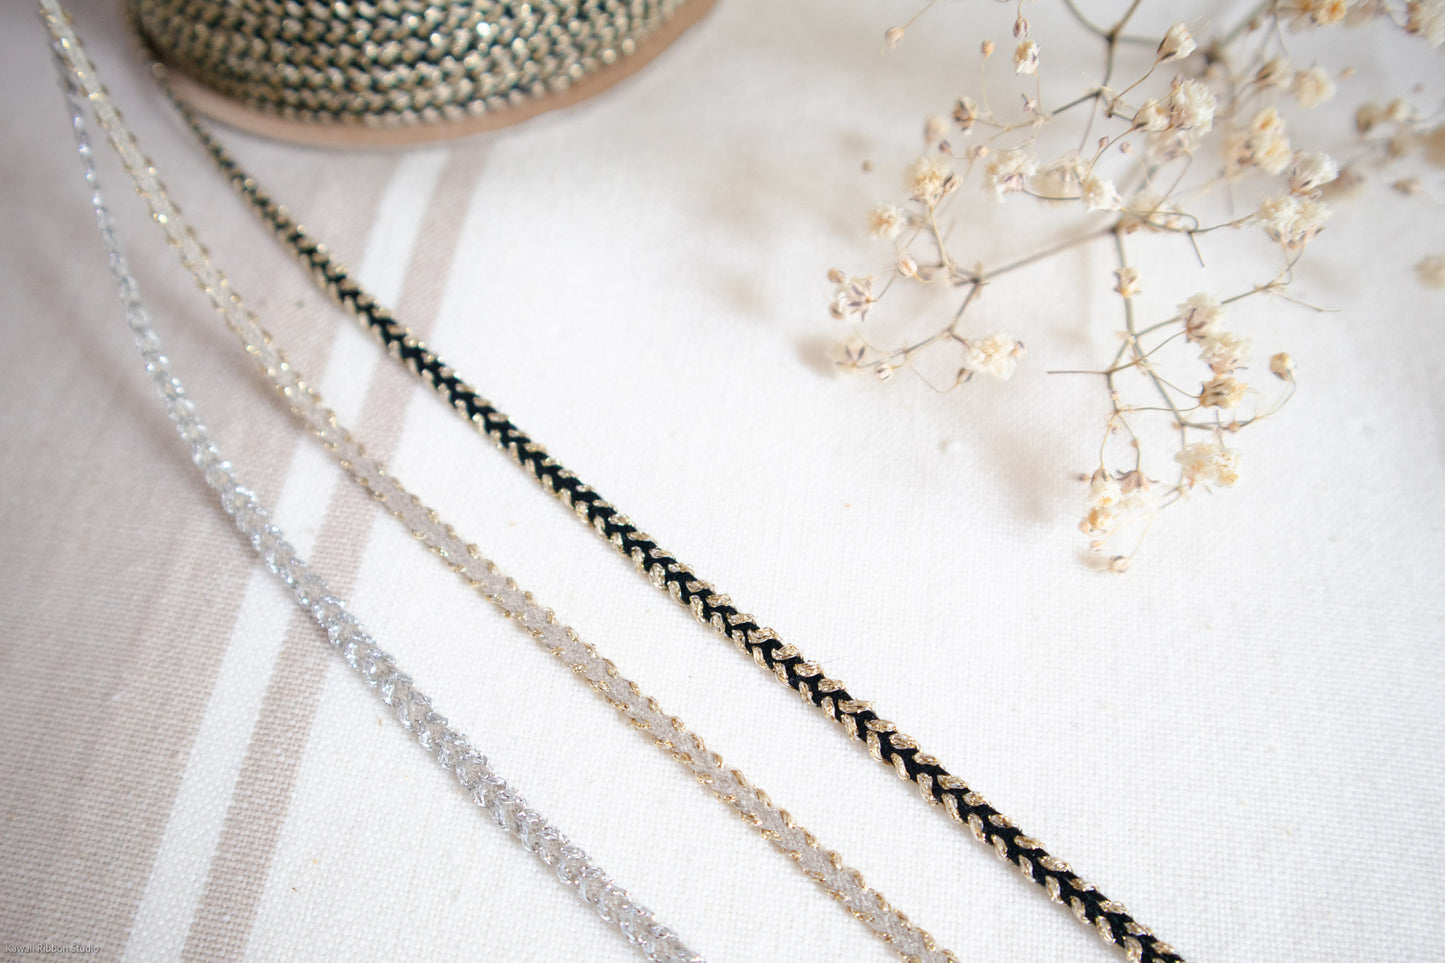 4mm White silver metallic jewelry cord in washed linen